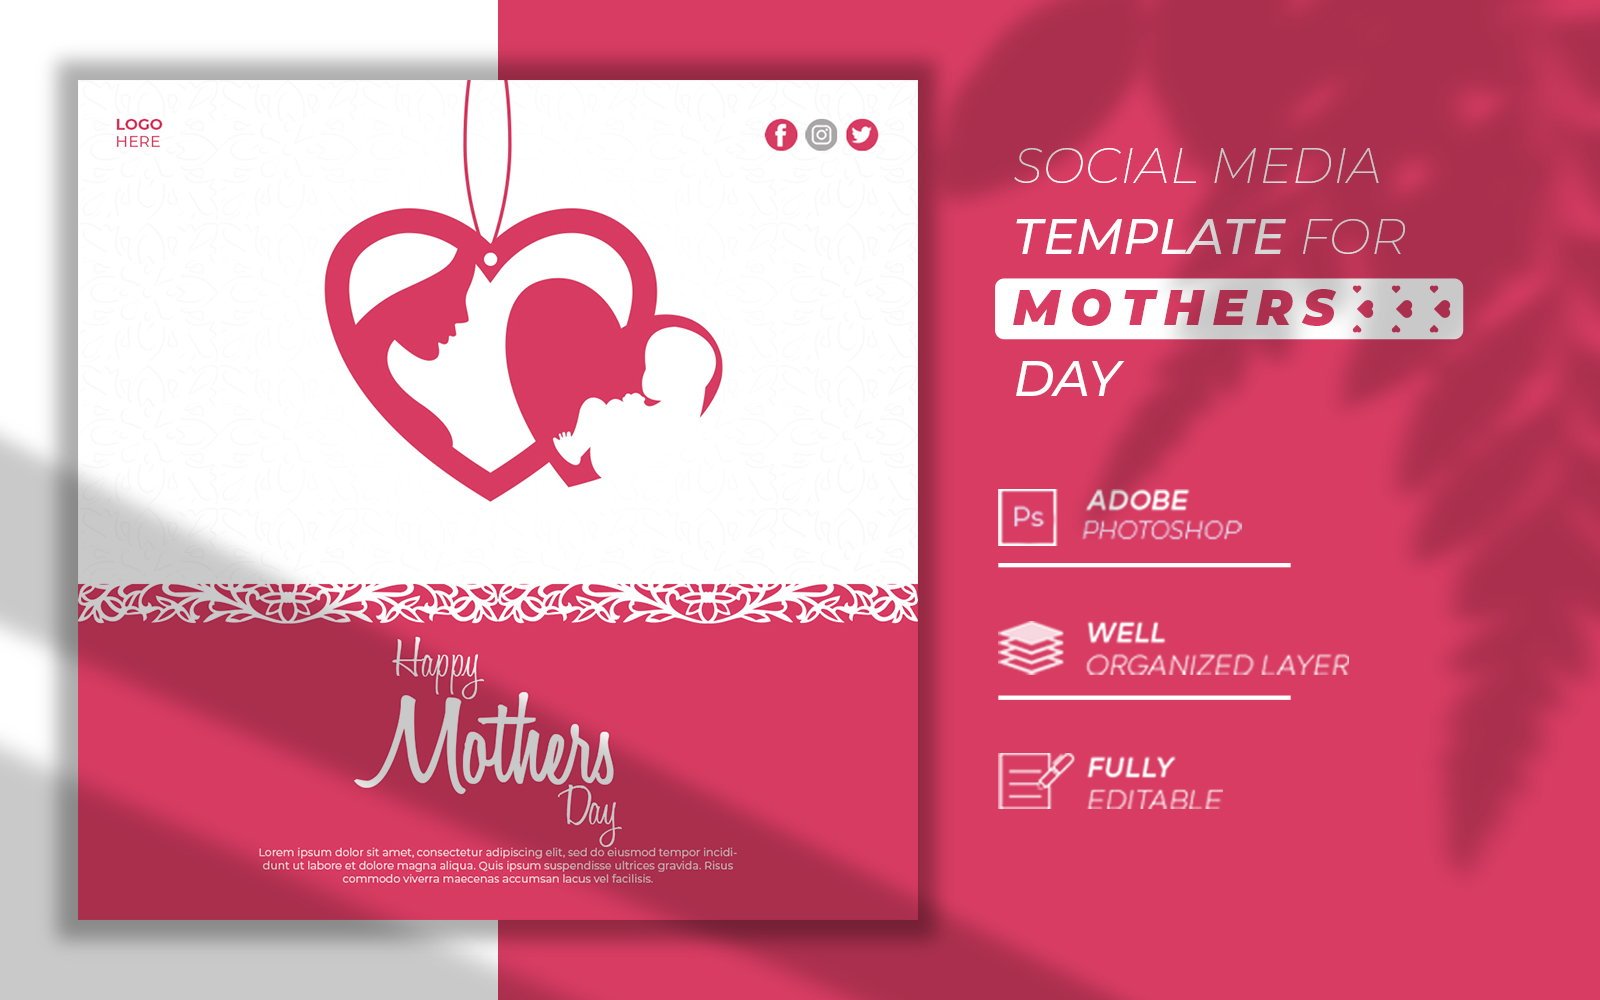 Template #315308 Day Social Webdesign Template - Logo template Preview